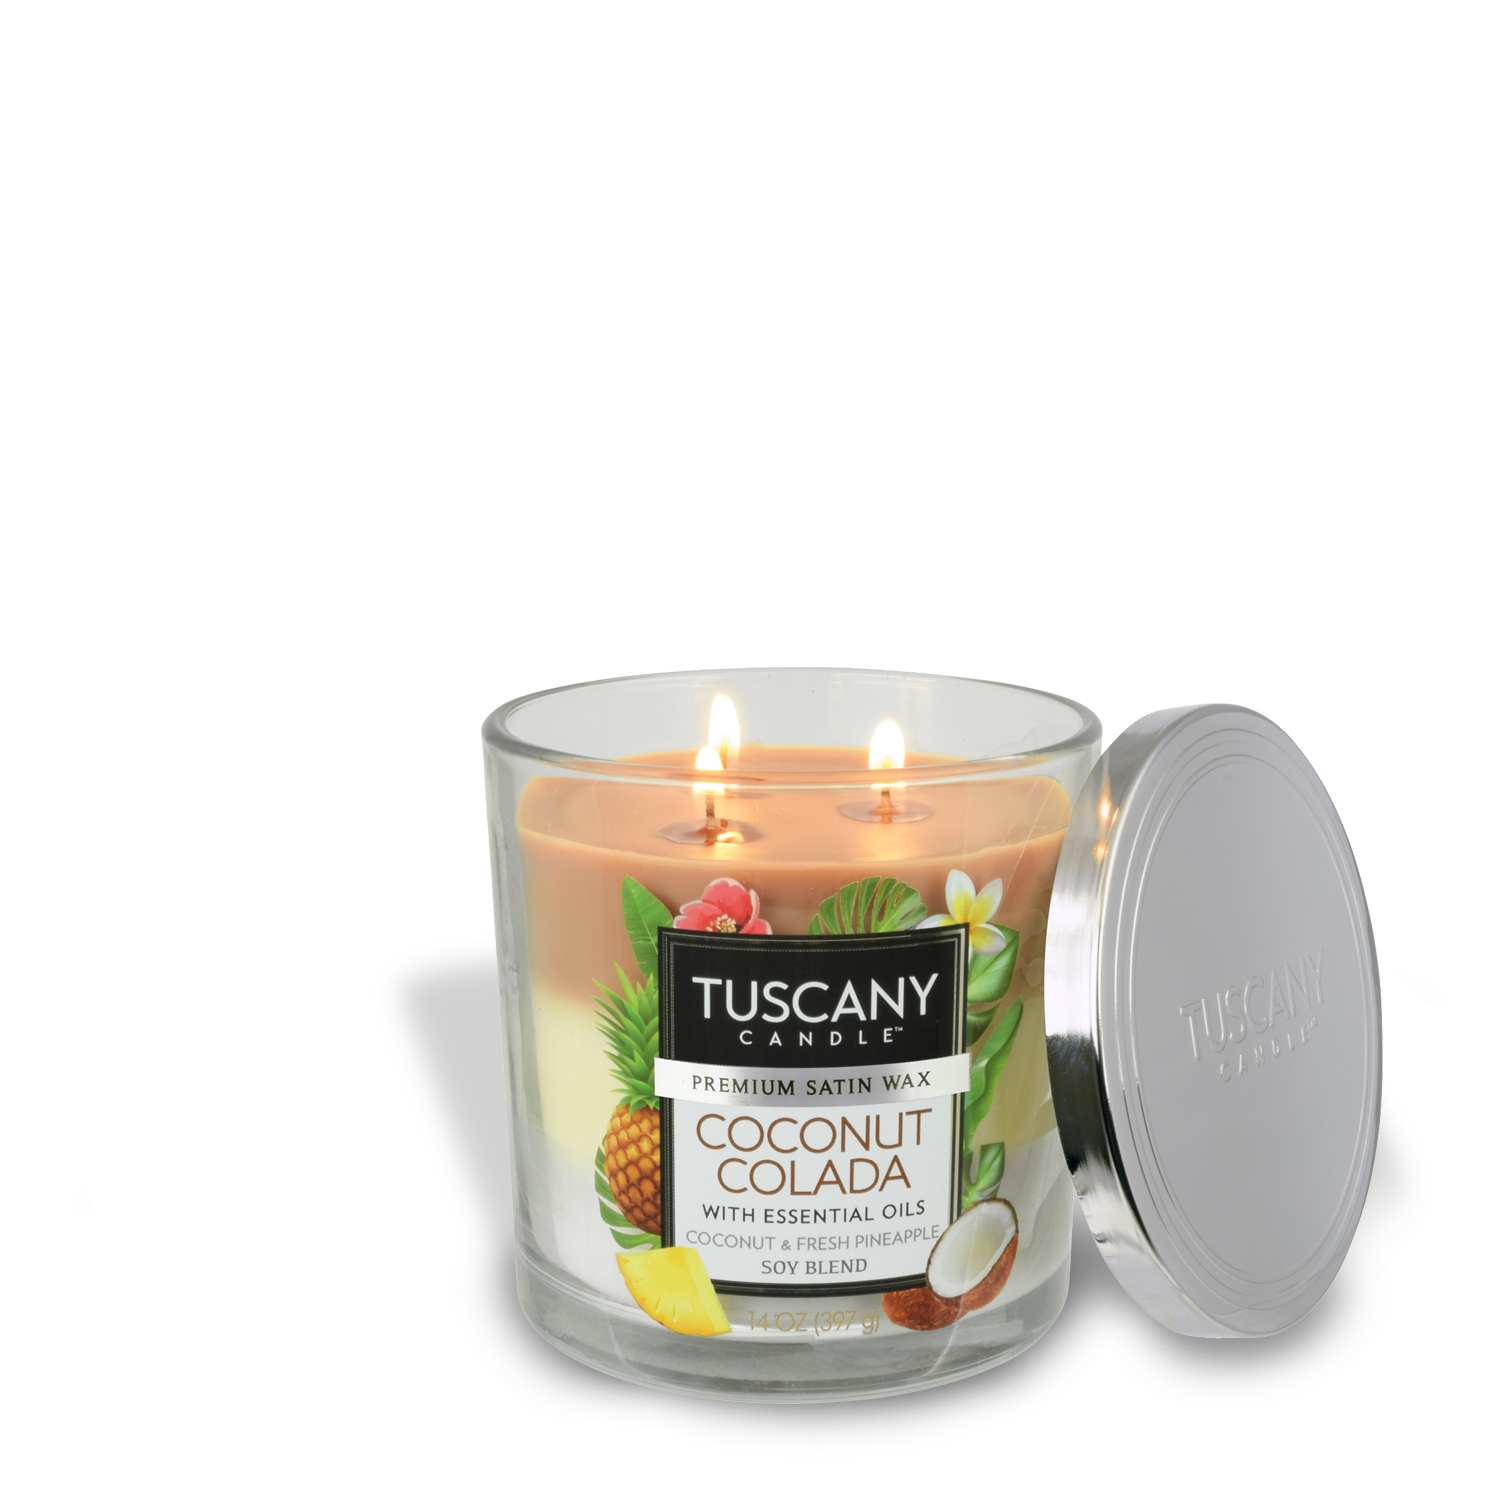 Tuscany Candle Marbled Wax 1 ea, Candles and Incense